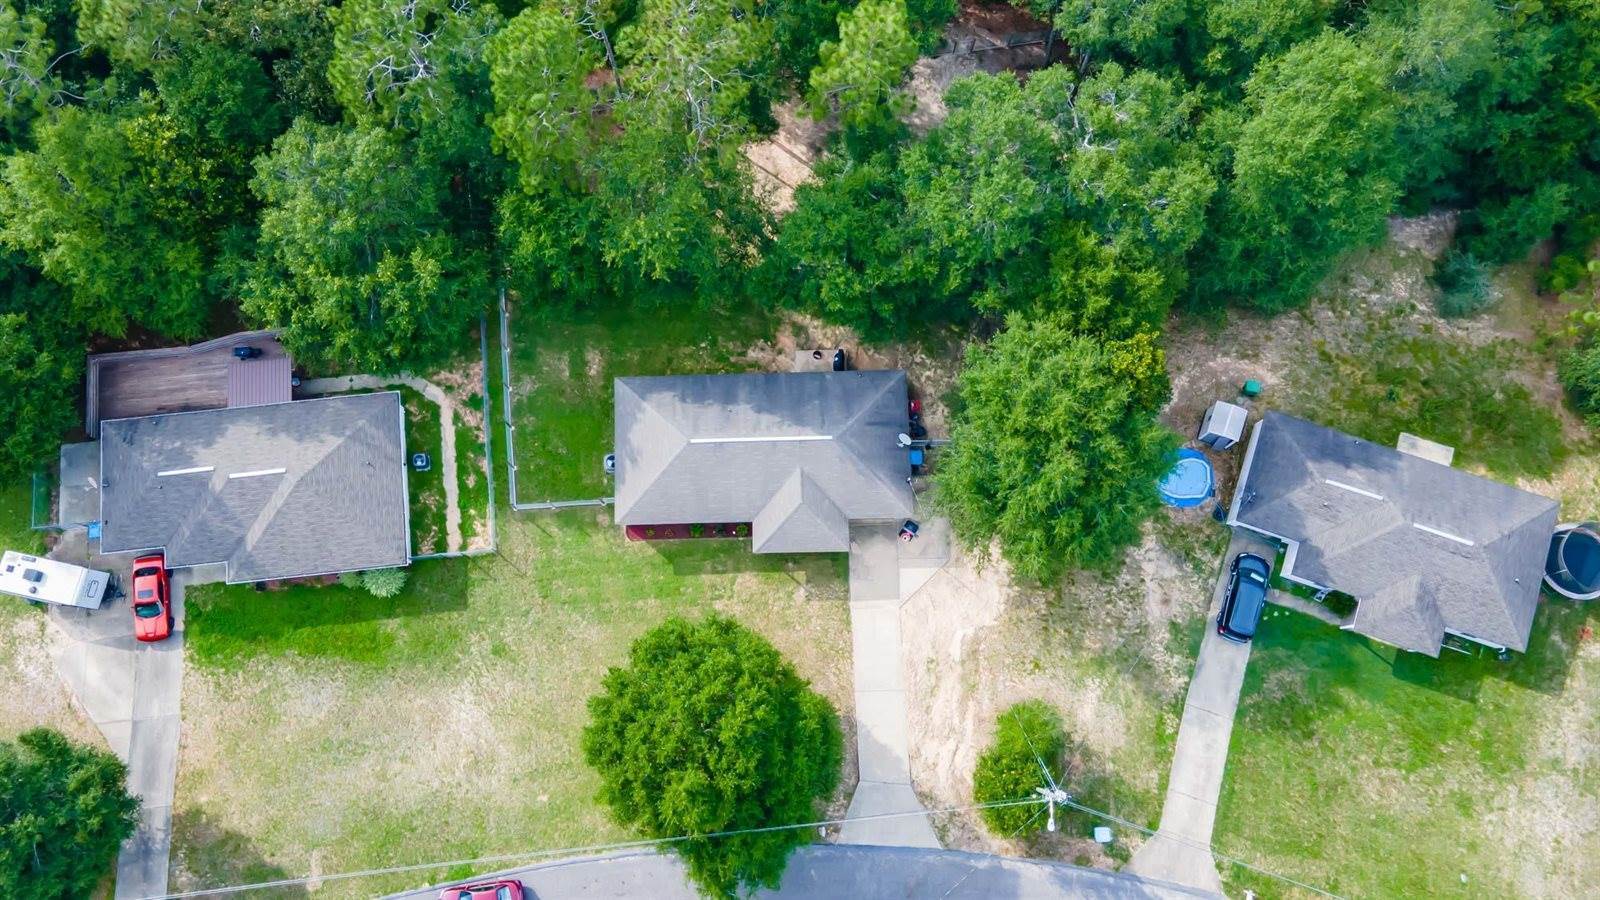 317 Lakeview Drive, Crestview, FL 32536